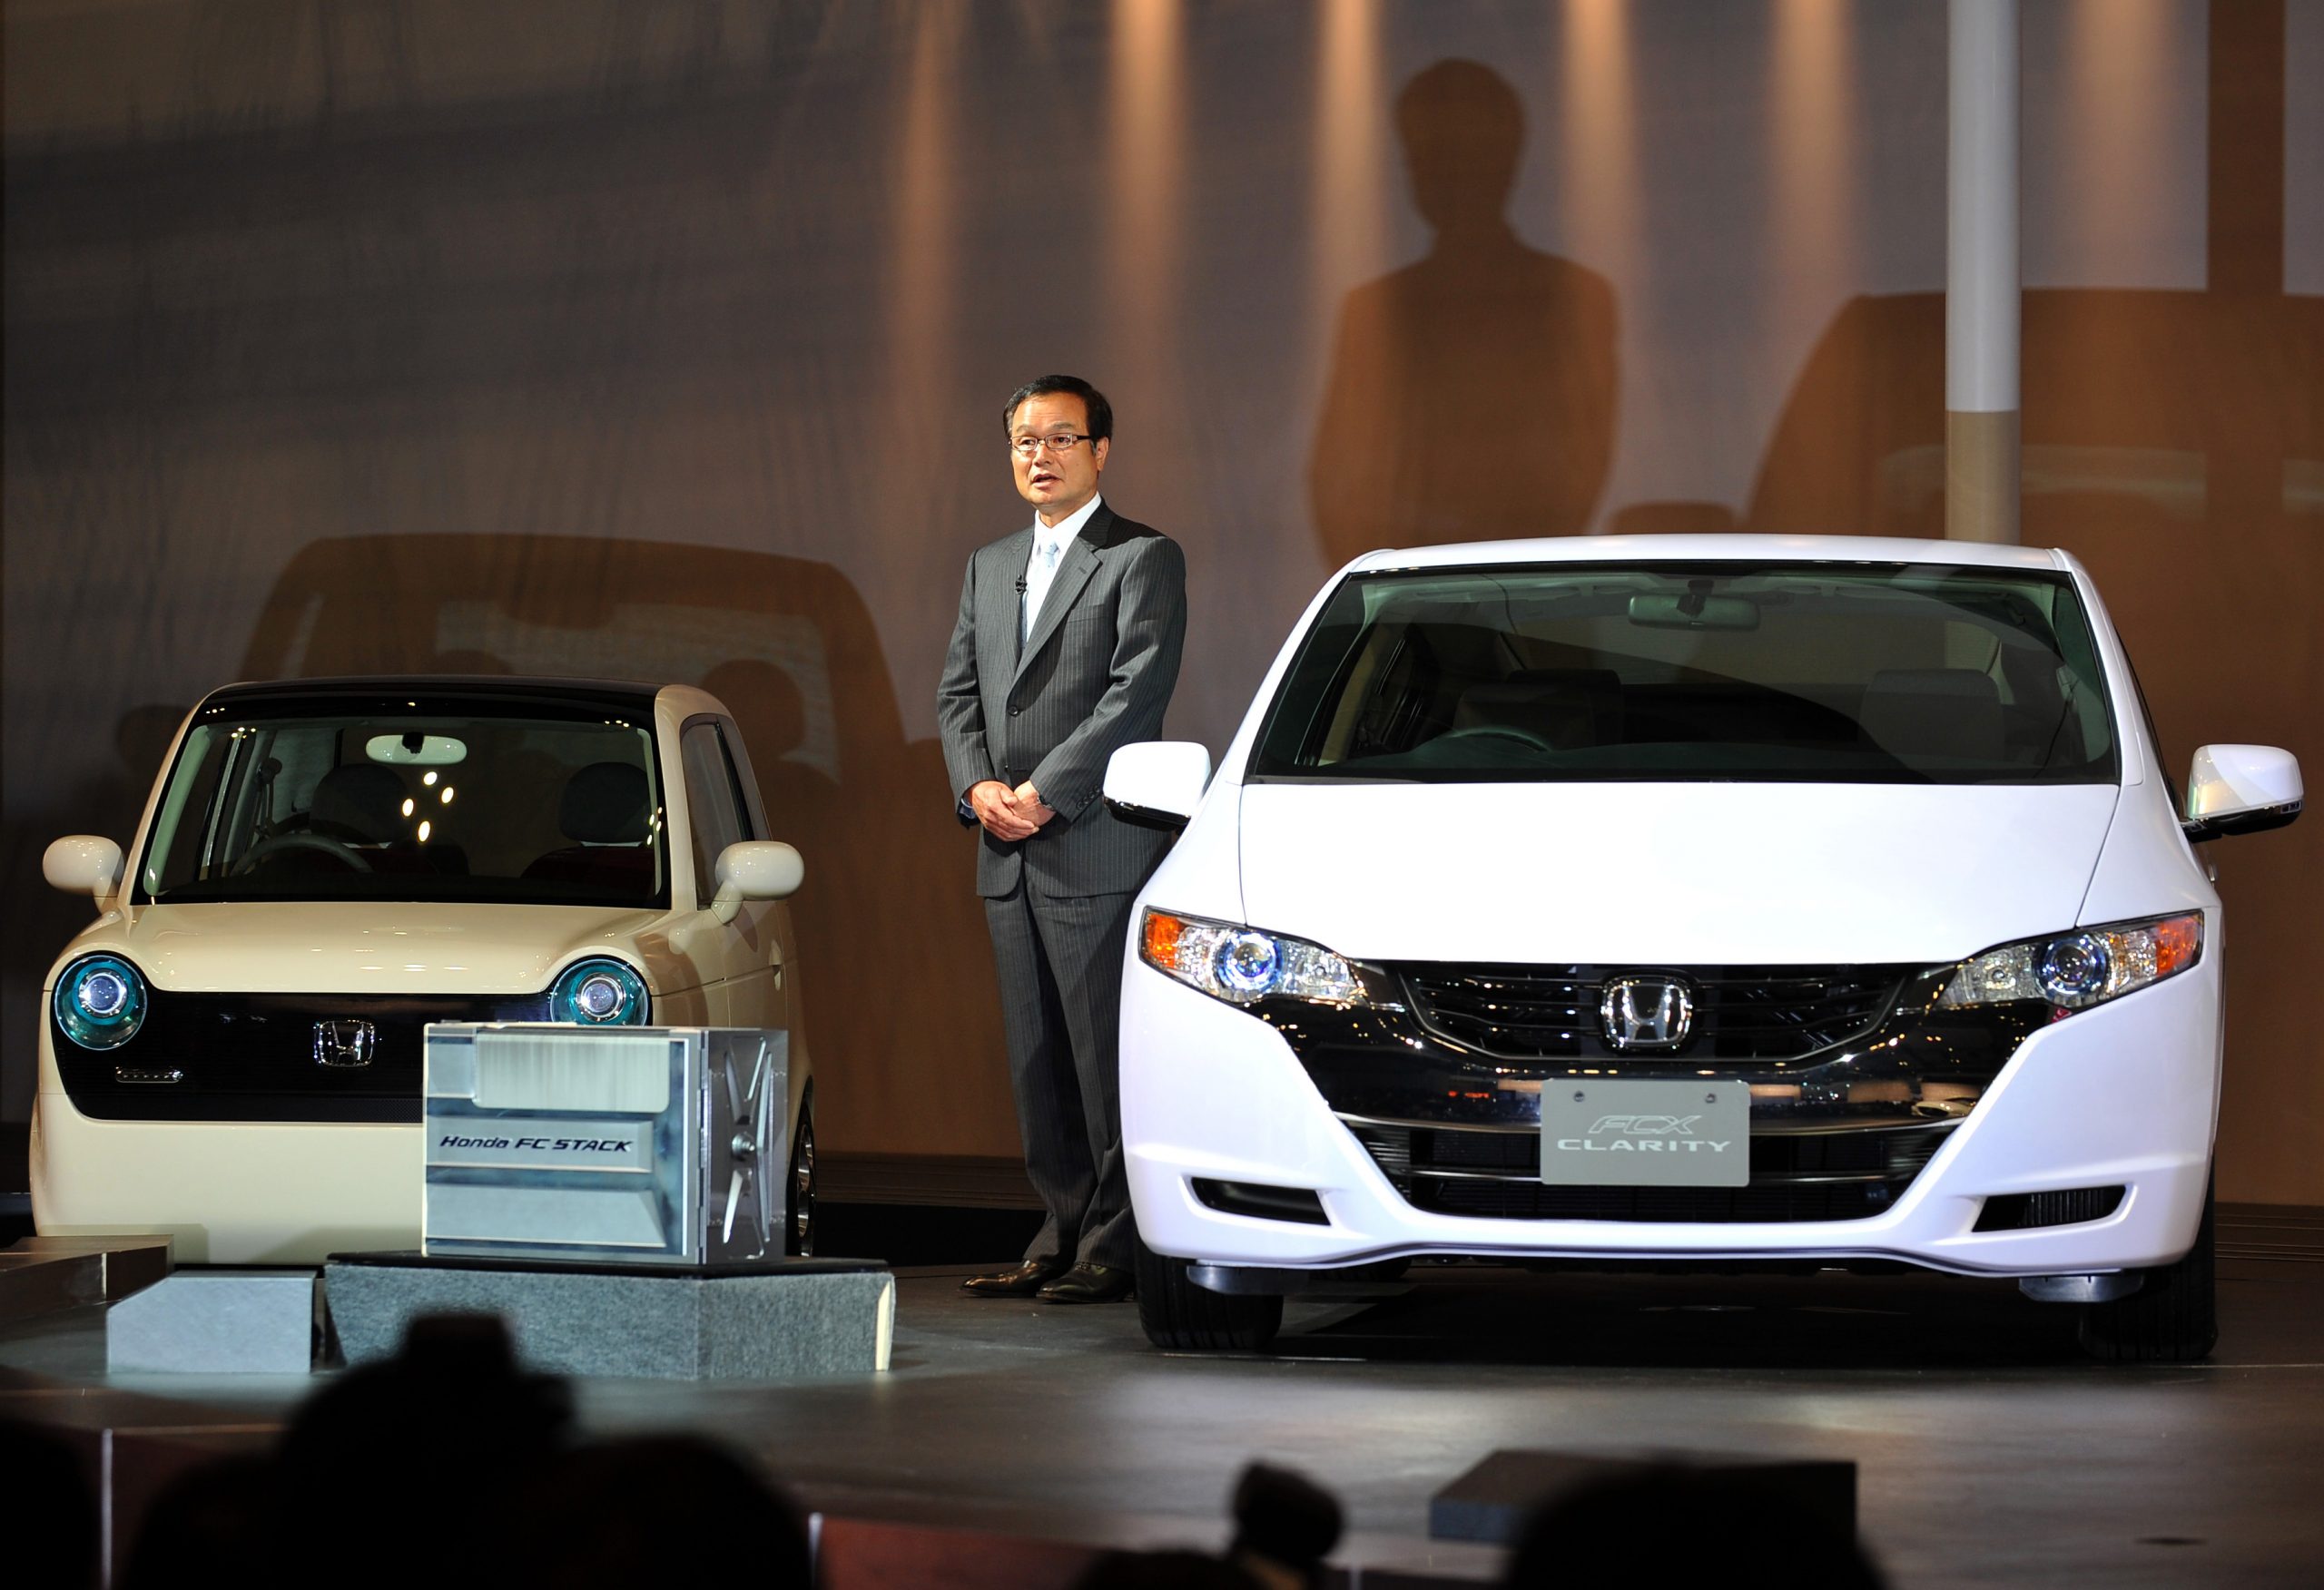 Honda Motor, presents the new concept cars "EV" (L) and the "FCX Clarity" during the Tokyo Motor Show